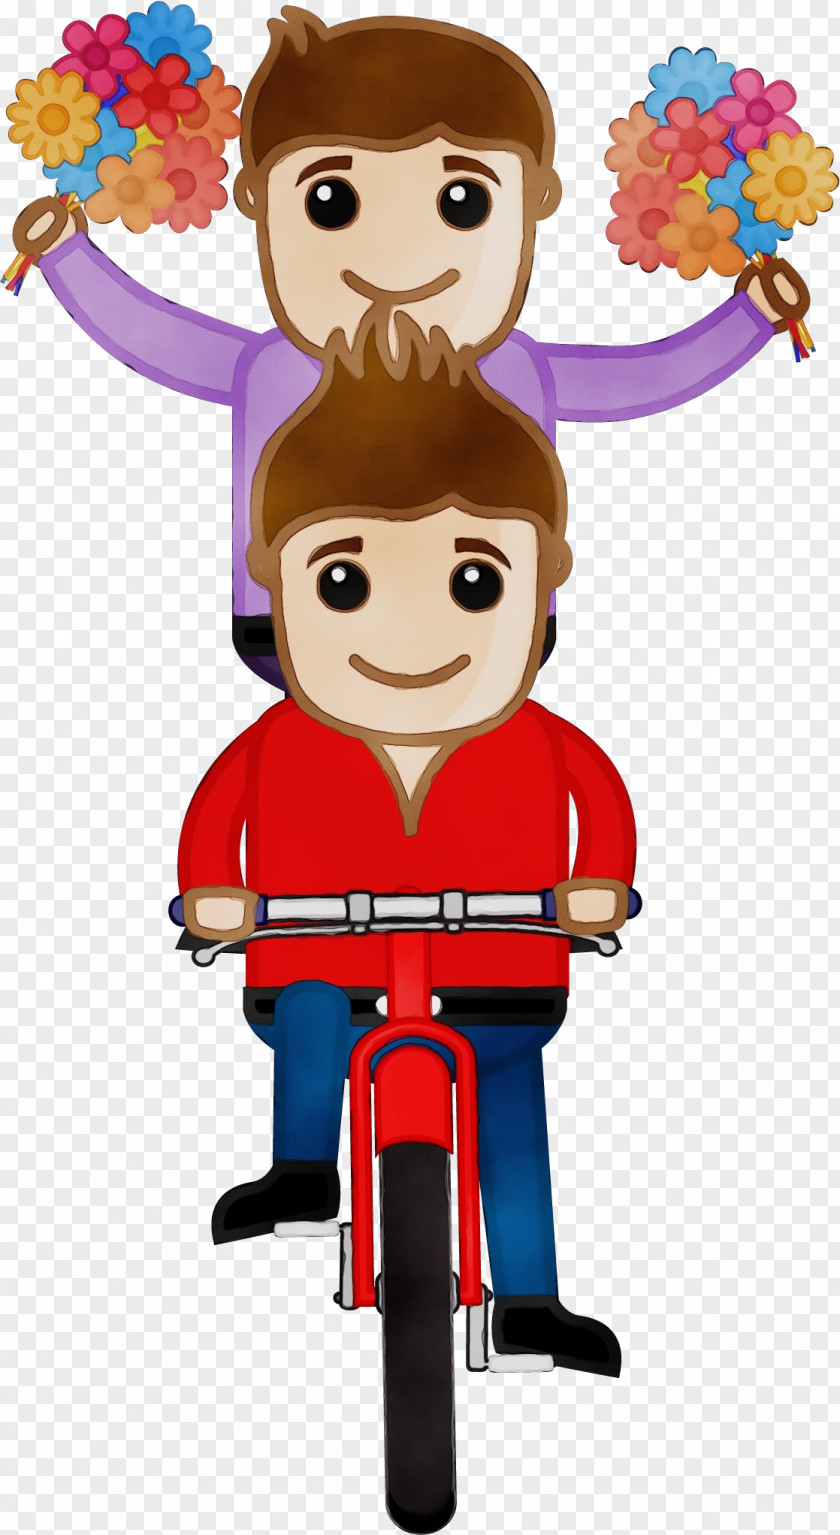 Animation Toy Cartoon Clip Art Animated PNG